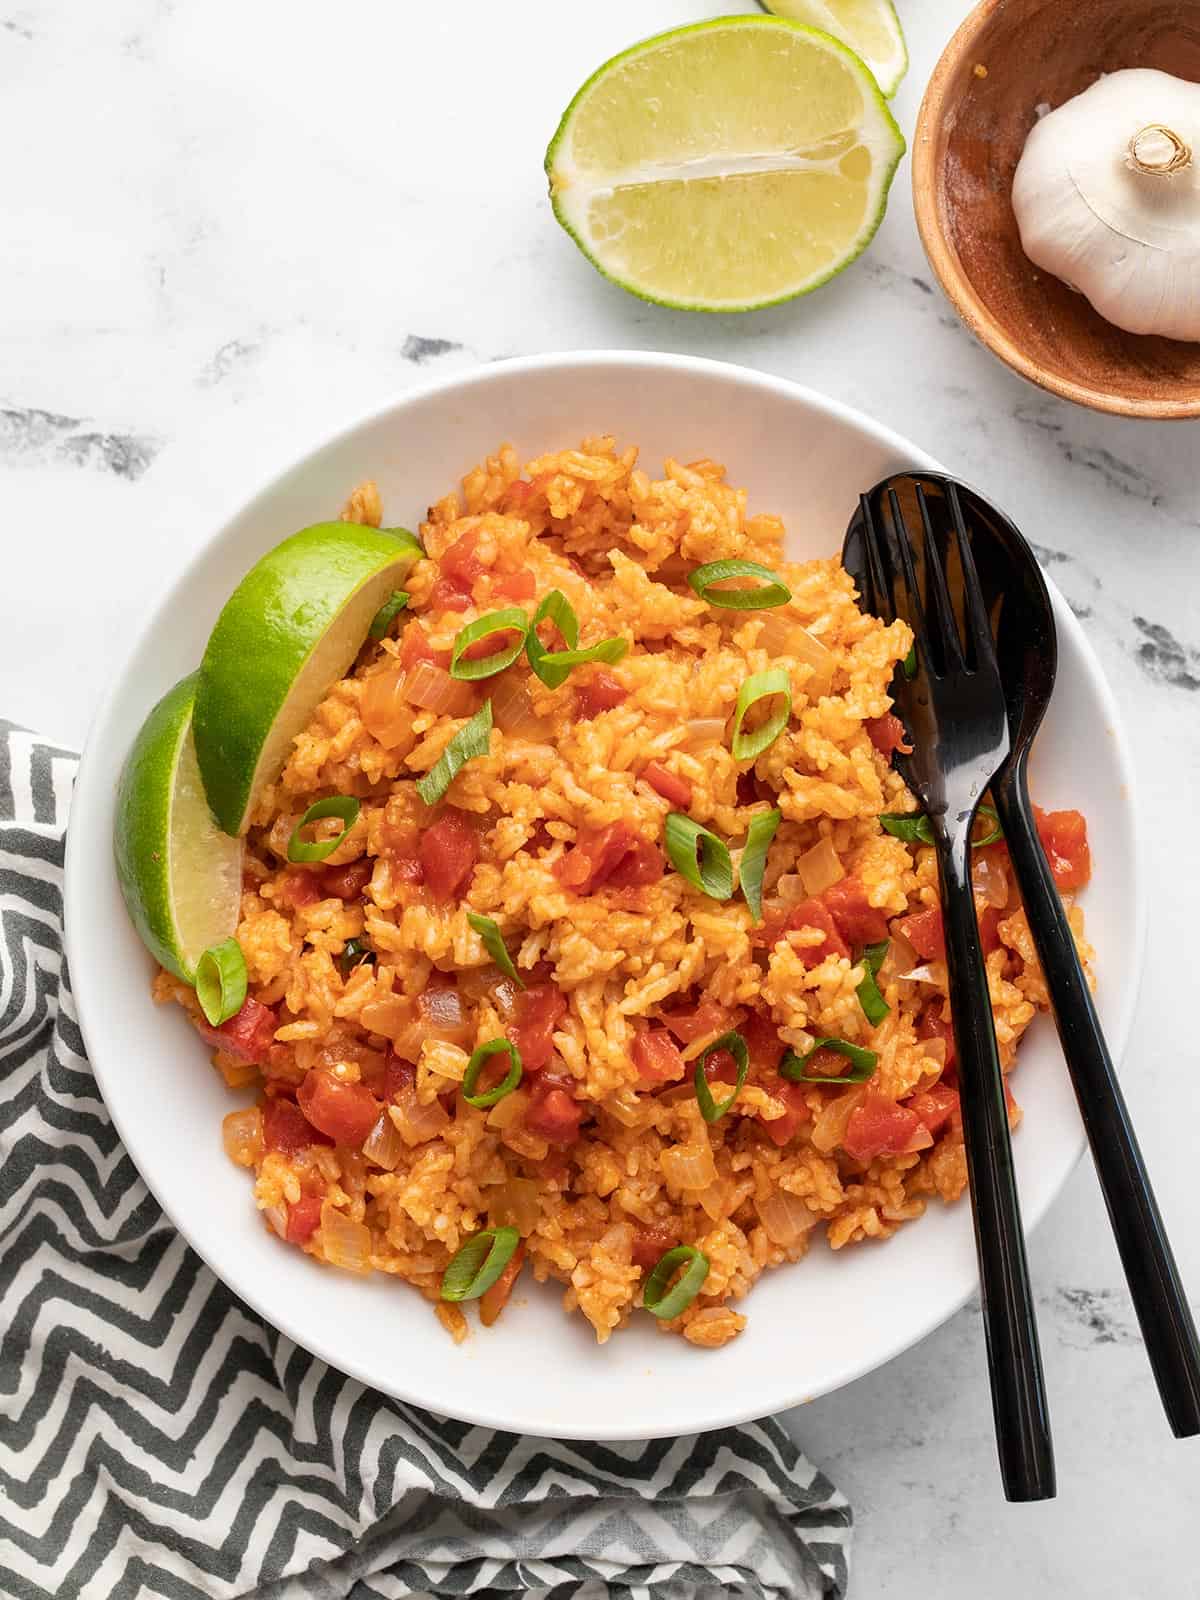 Tomato rice in a bowl with limes and green onion.